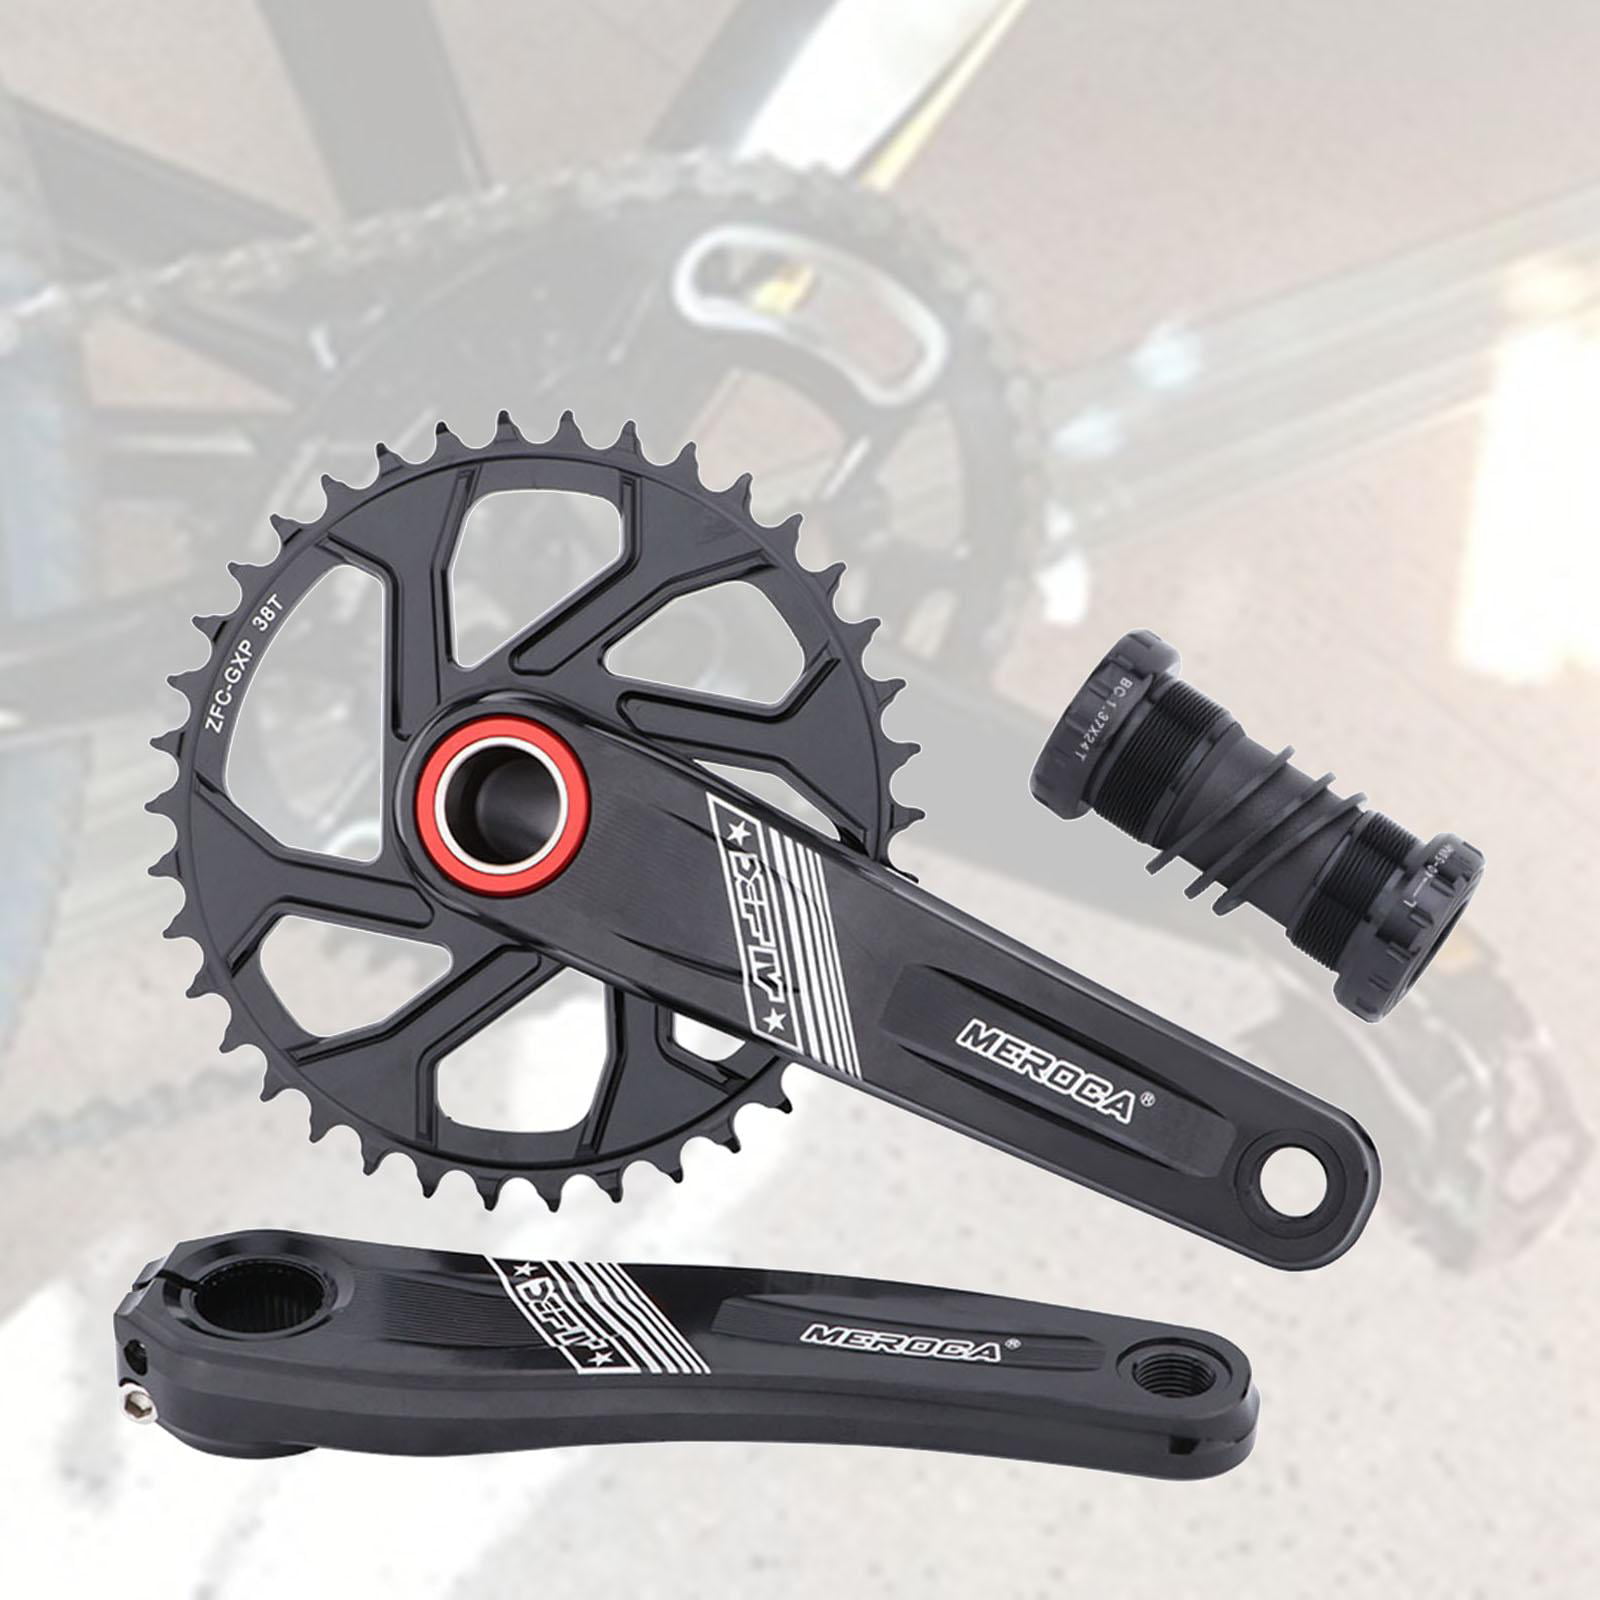 ROADNADO Bike Crankset 34T BB Crank 36T Chainring 104BCD MTB Crank Set 170mm Road Bicycle Crank with Chainring Bolts Lightweight Shockproof Easy to Install Firm Cycling Bike Parts